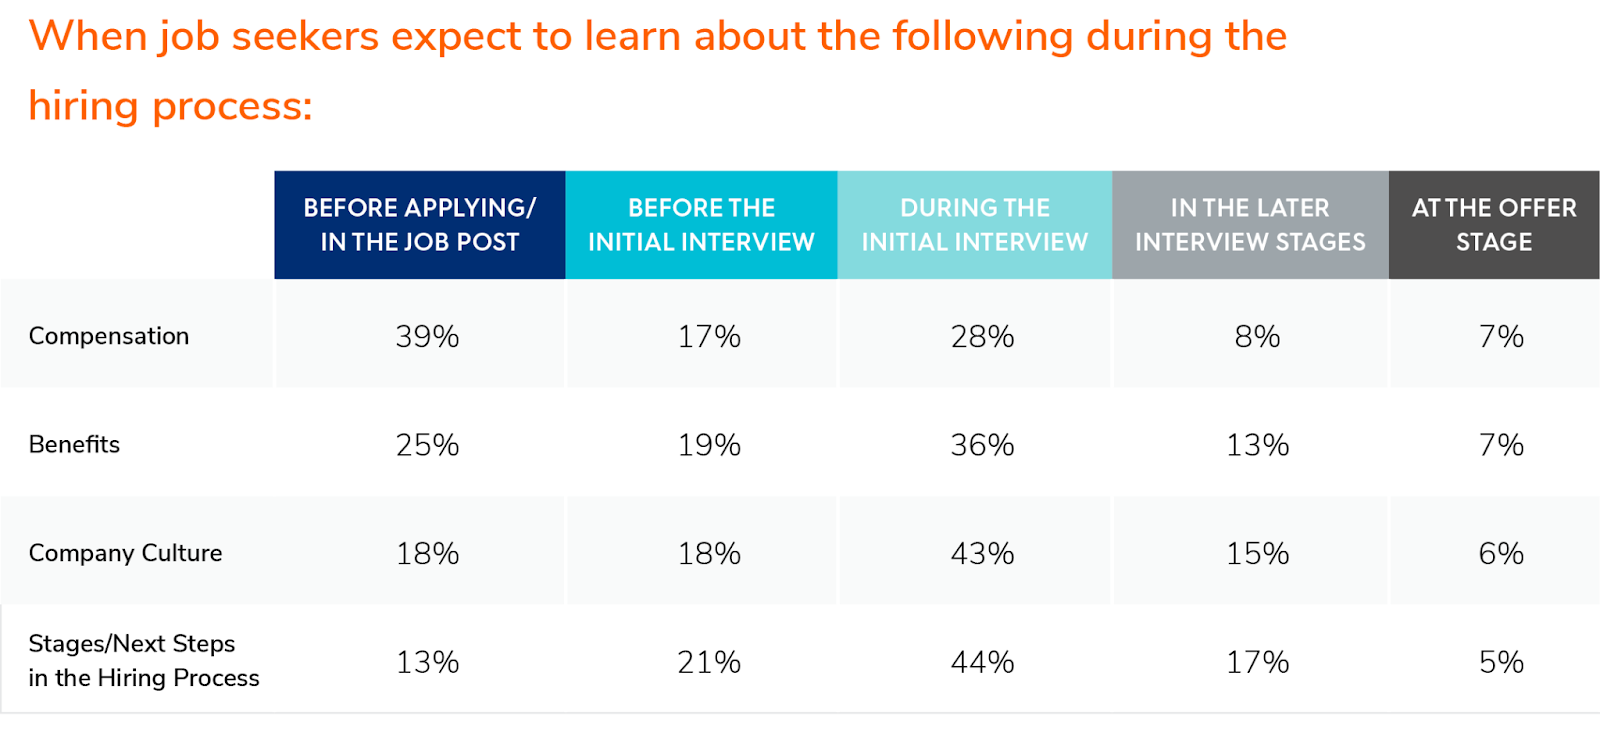 what job seekers expect to learn during the hiring process